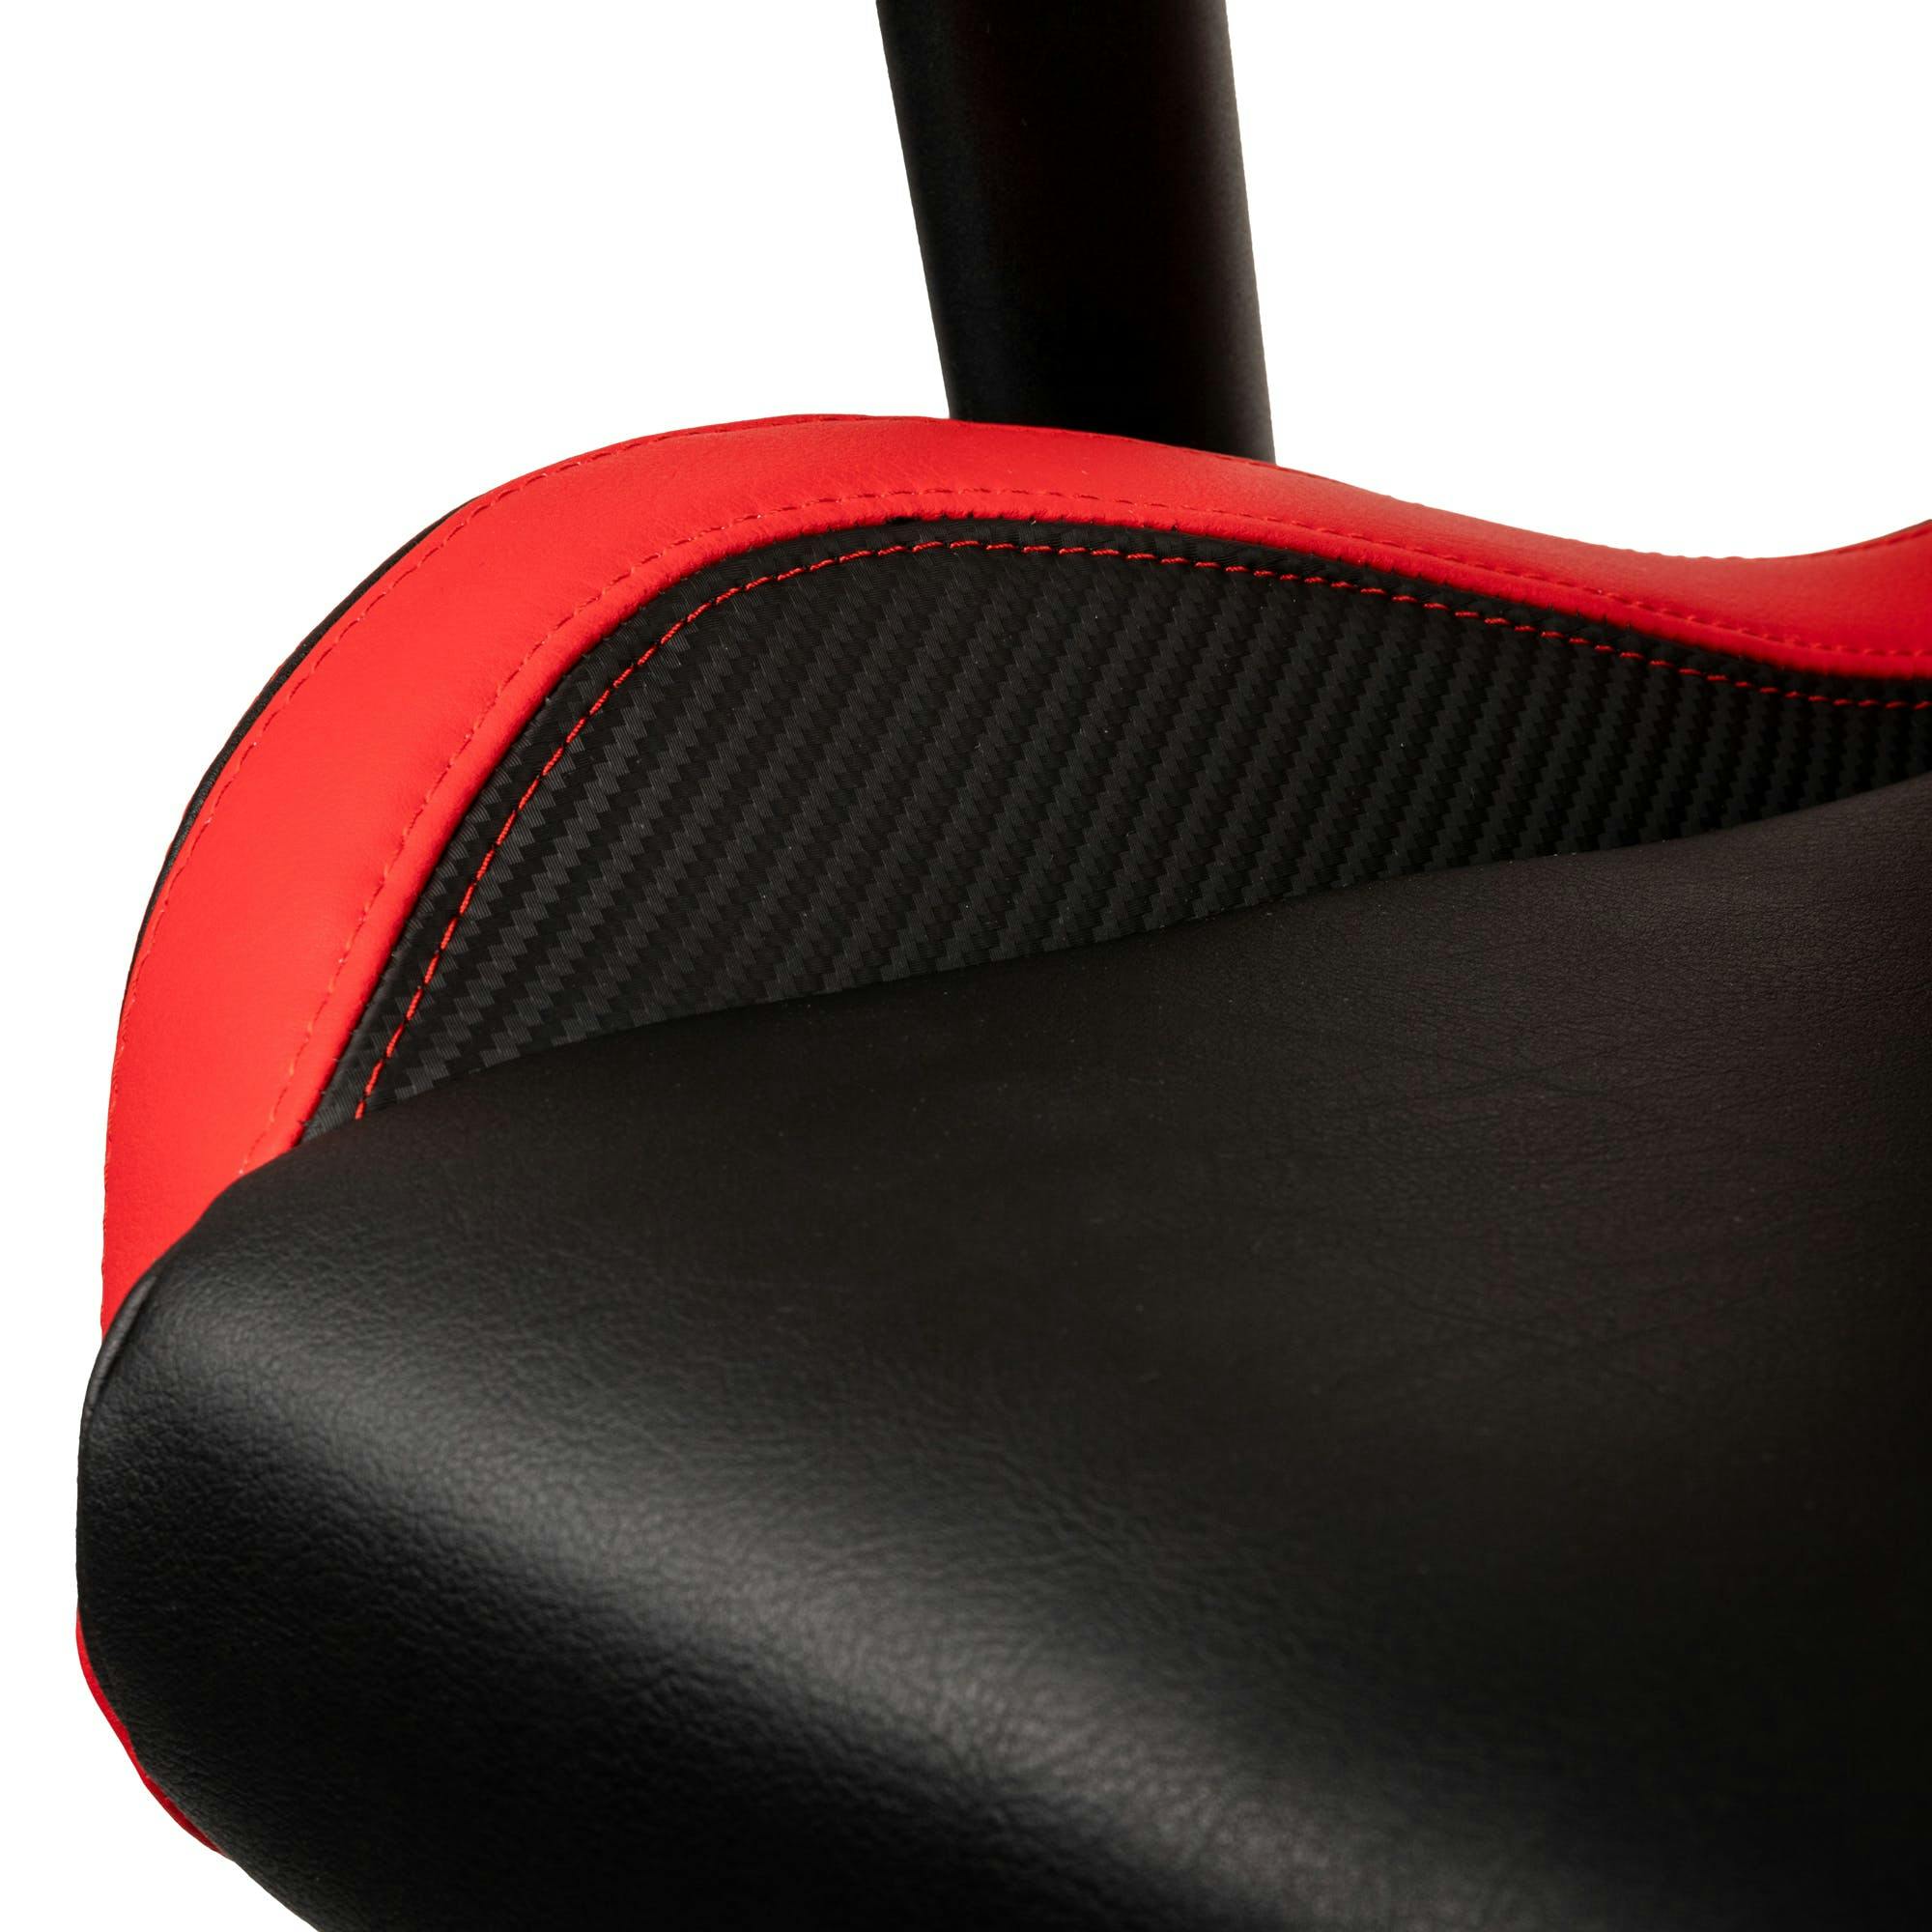 EPIC Compact Black/Carbon/Red